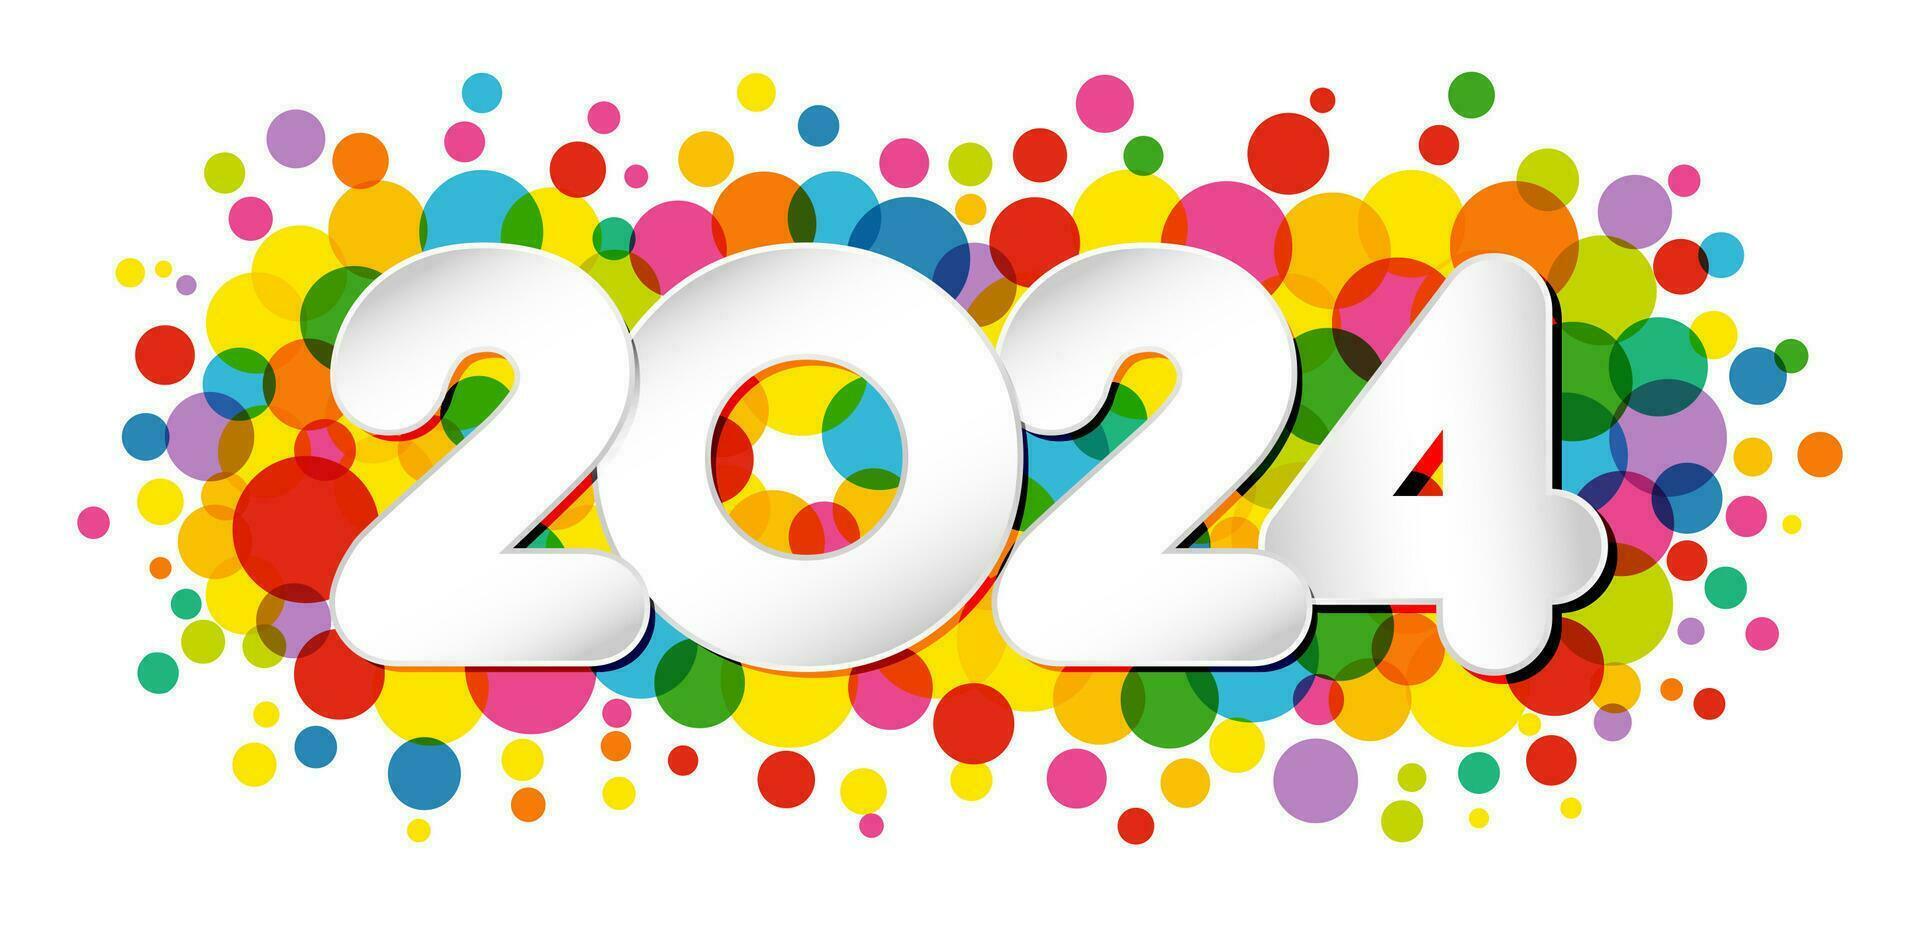 A Happy New Year 2024 horizontal banner. Decorative concept. Greeting card design. Creative colorful icon vector